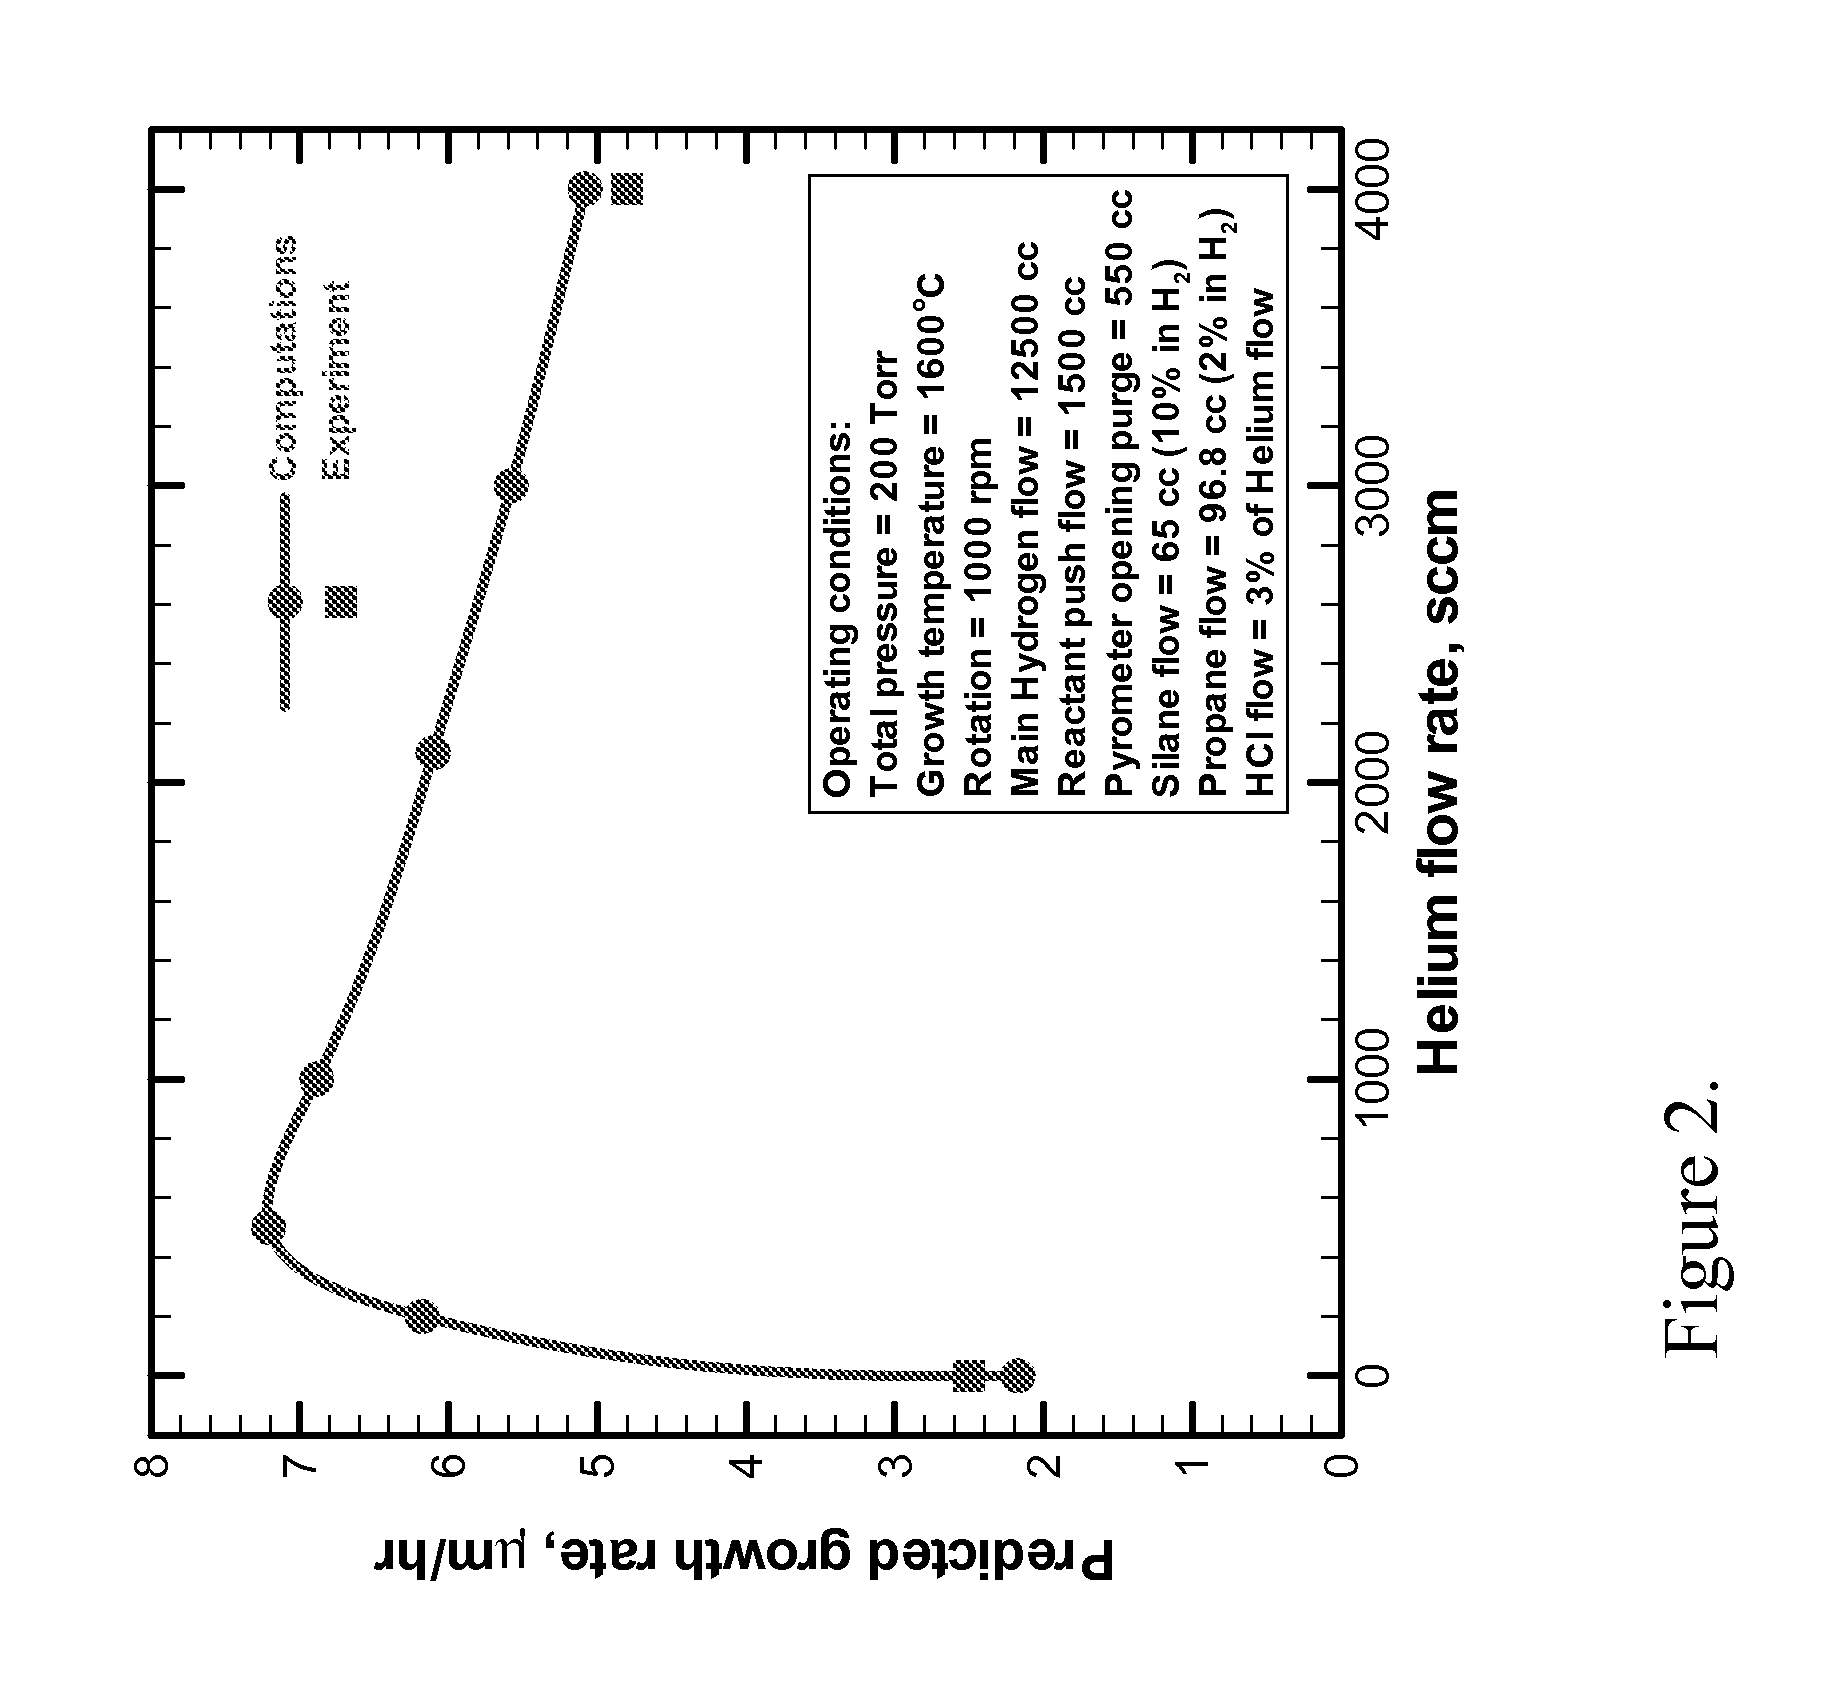 METHOD, SYSTEM, AND APPARATUS FOR THE GROWTH OF ON-AXIS SiC AND SIMILAR SEMICONDUCTOR MATERIALS